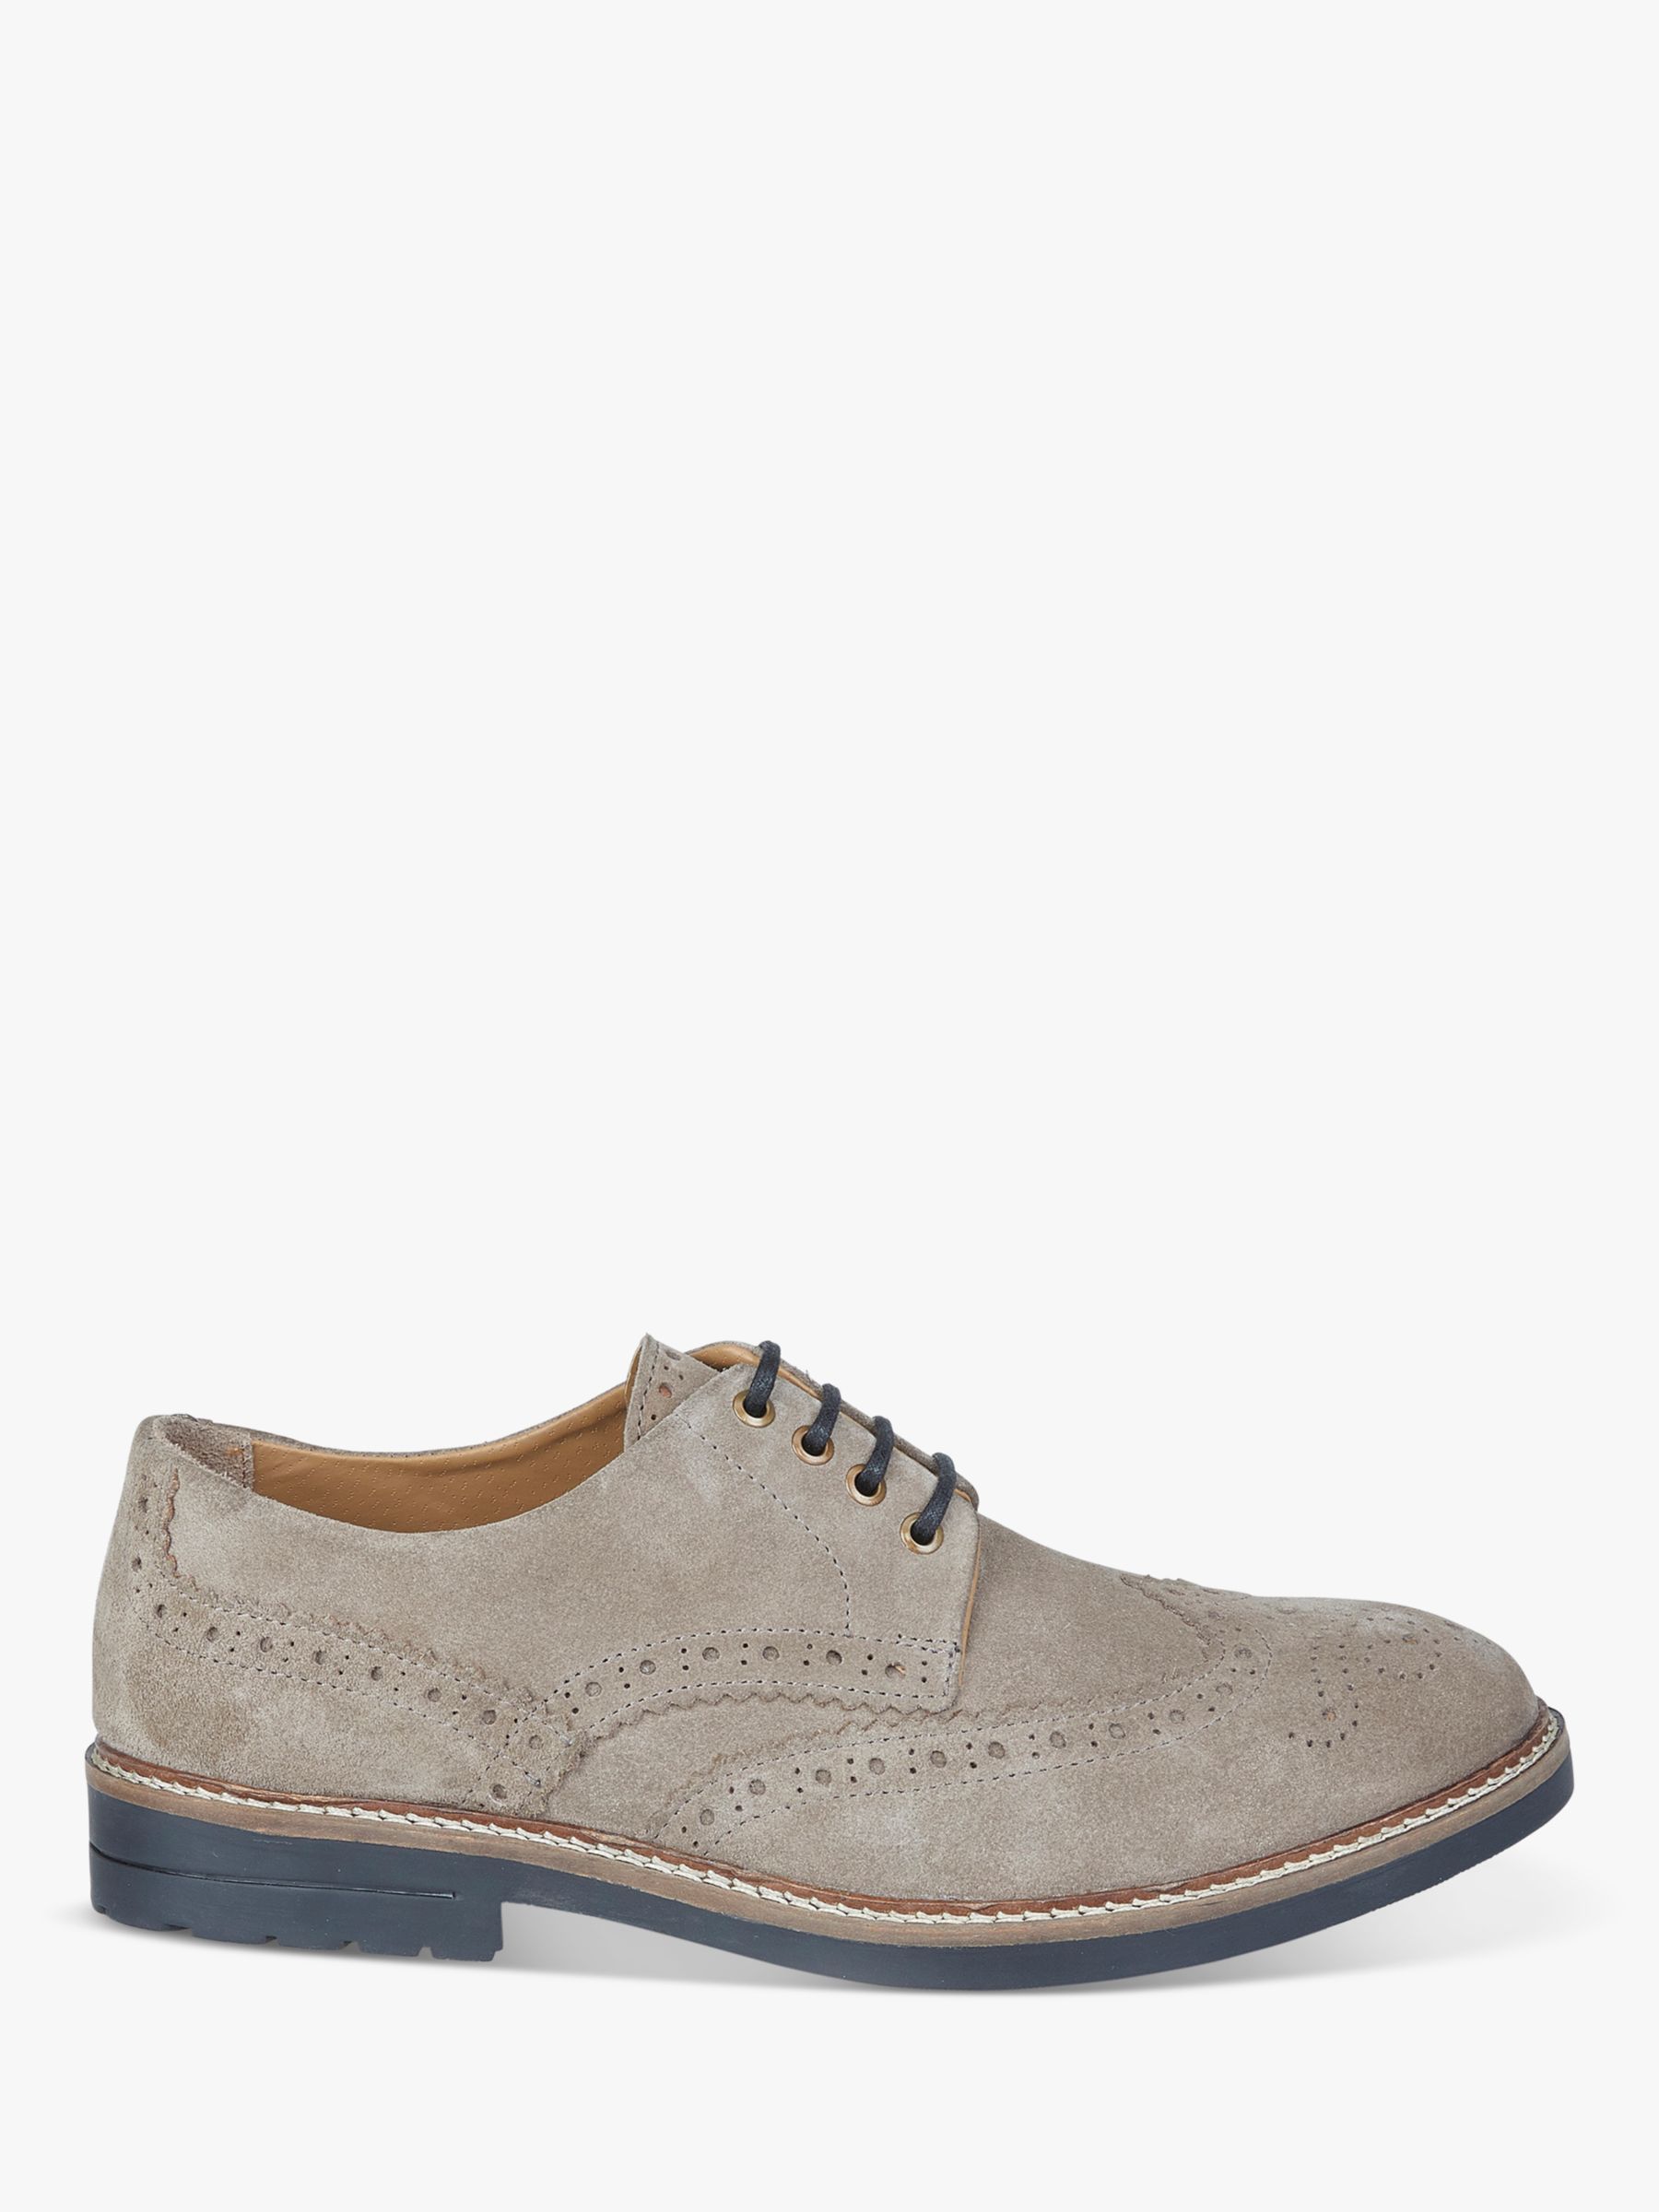 Silver Street London Tooting Suede Lace Up Brogue Shoes at John Lewis ...